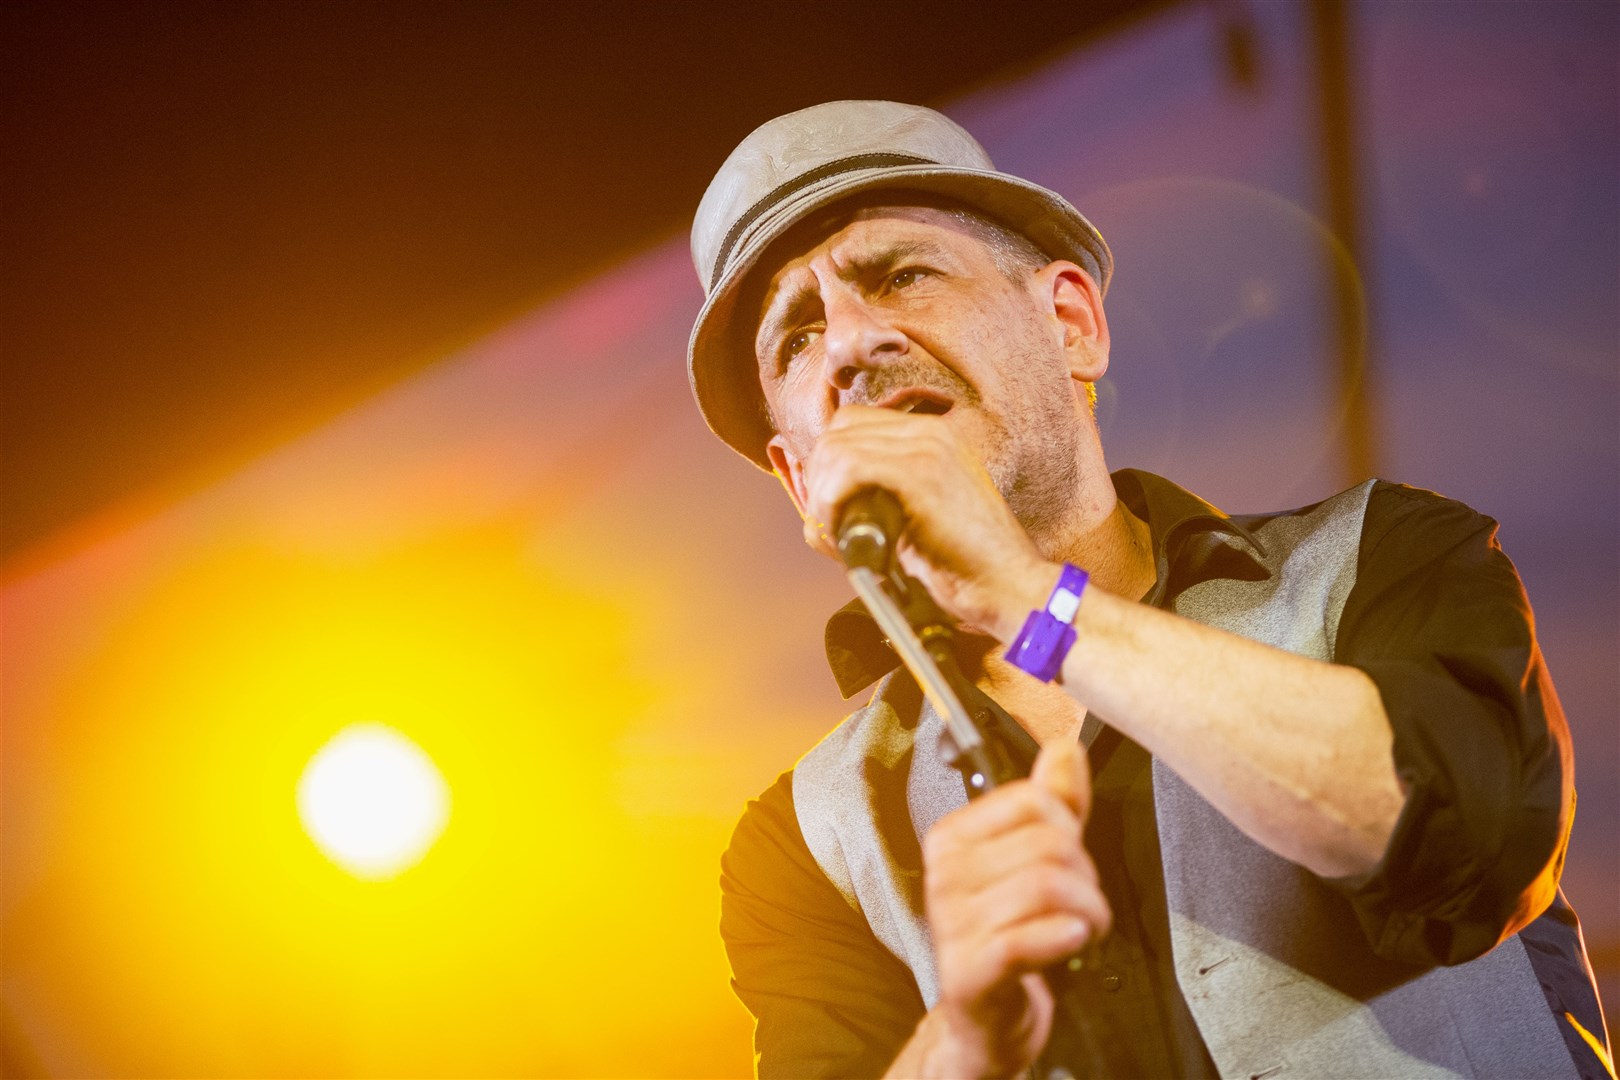 Andy Pennycuick, lead vocalist of Bombskare, closed the 2019 Speyfest festival on Sunday evening...Speyfest 2019...Picture: Daniel Forsyth. Image No.044527.